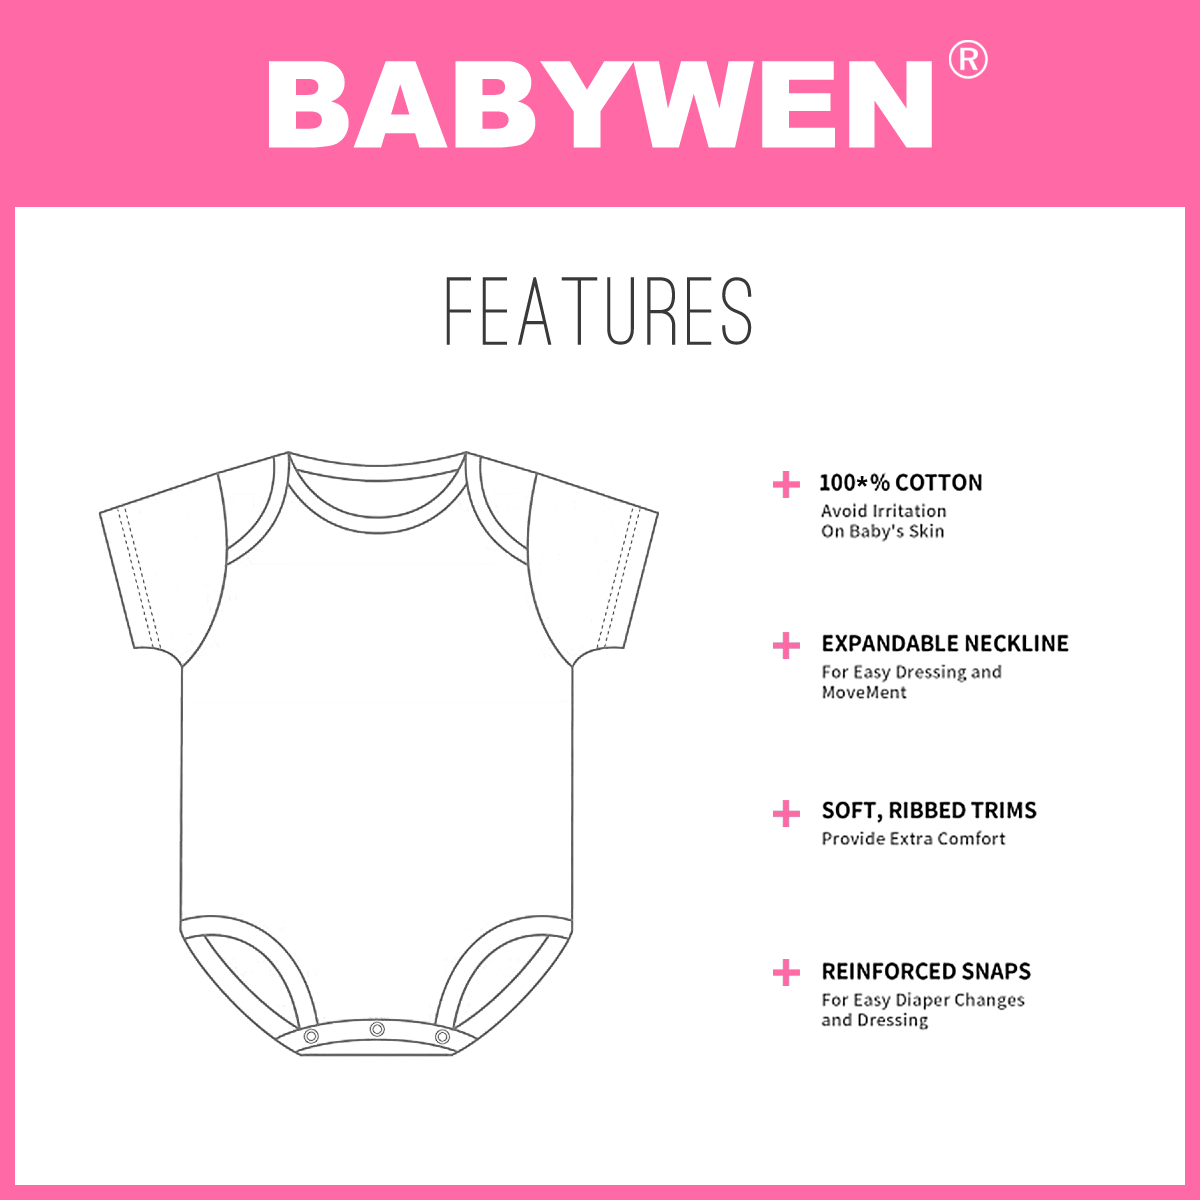 Twin Babys Funny Ctrl + C Ctrl + V Printed Infant Baby Cotton Bodysuits (Pink, 12-18M) - image 5 of 5